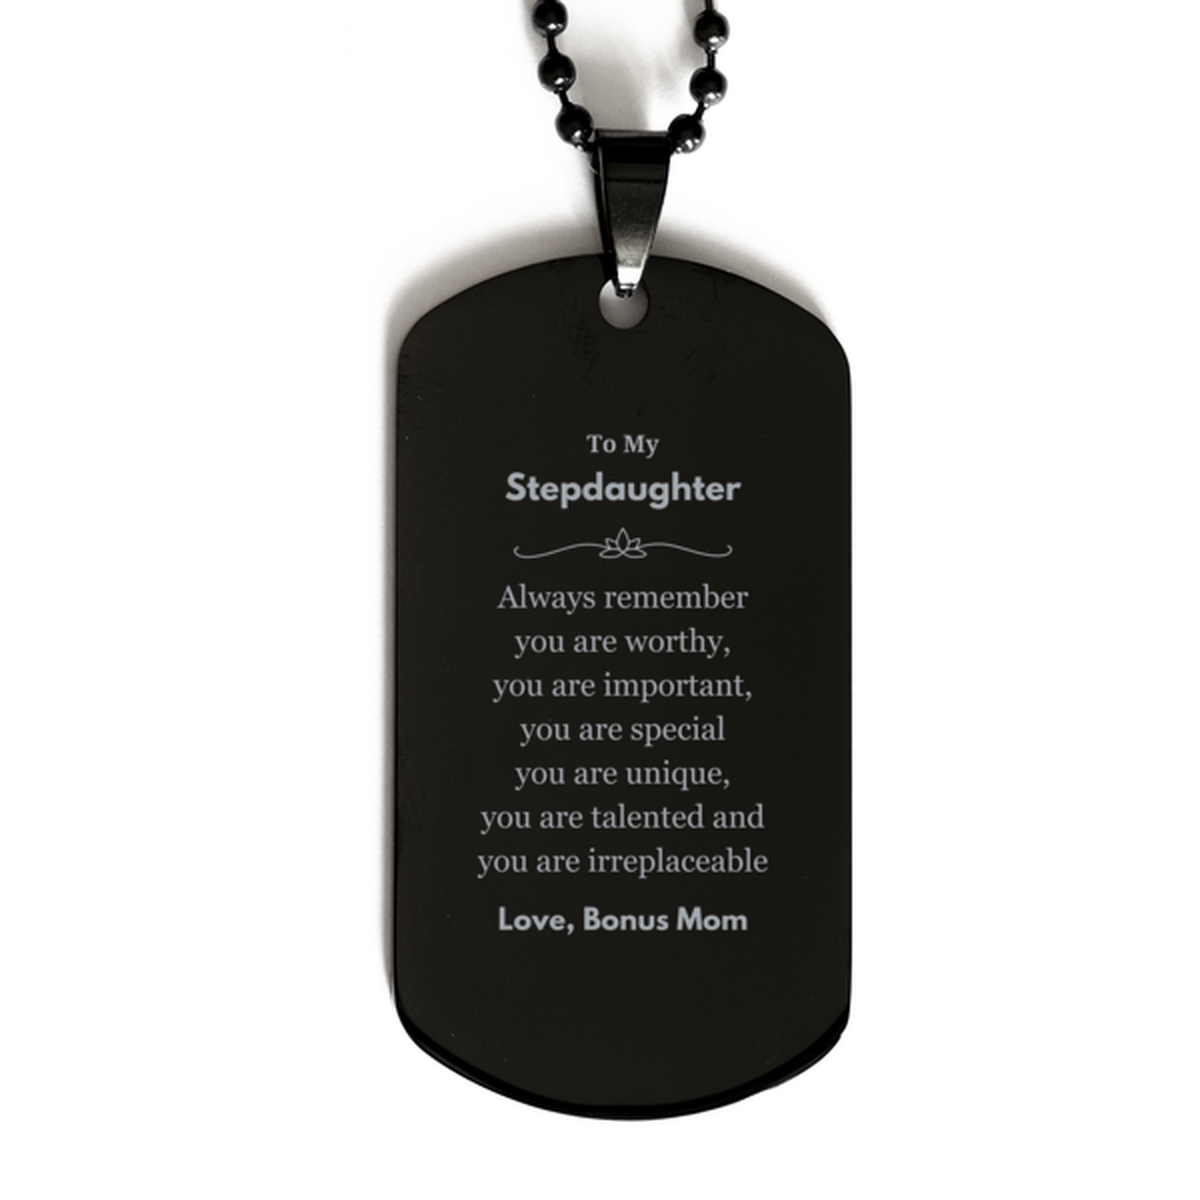 Stepdaughter Birthday Gifts from Bonus Mom, Inspirational Black Dog Tag for Stepdaughter Christmas Graduation Gifts for Stepdaughter Always remember you are worthy, you are important. Love, Bonus Mom